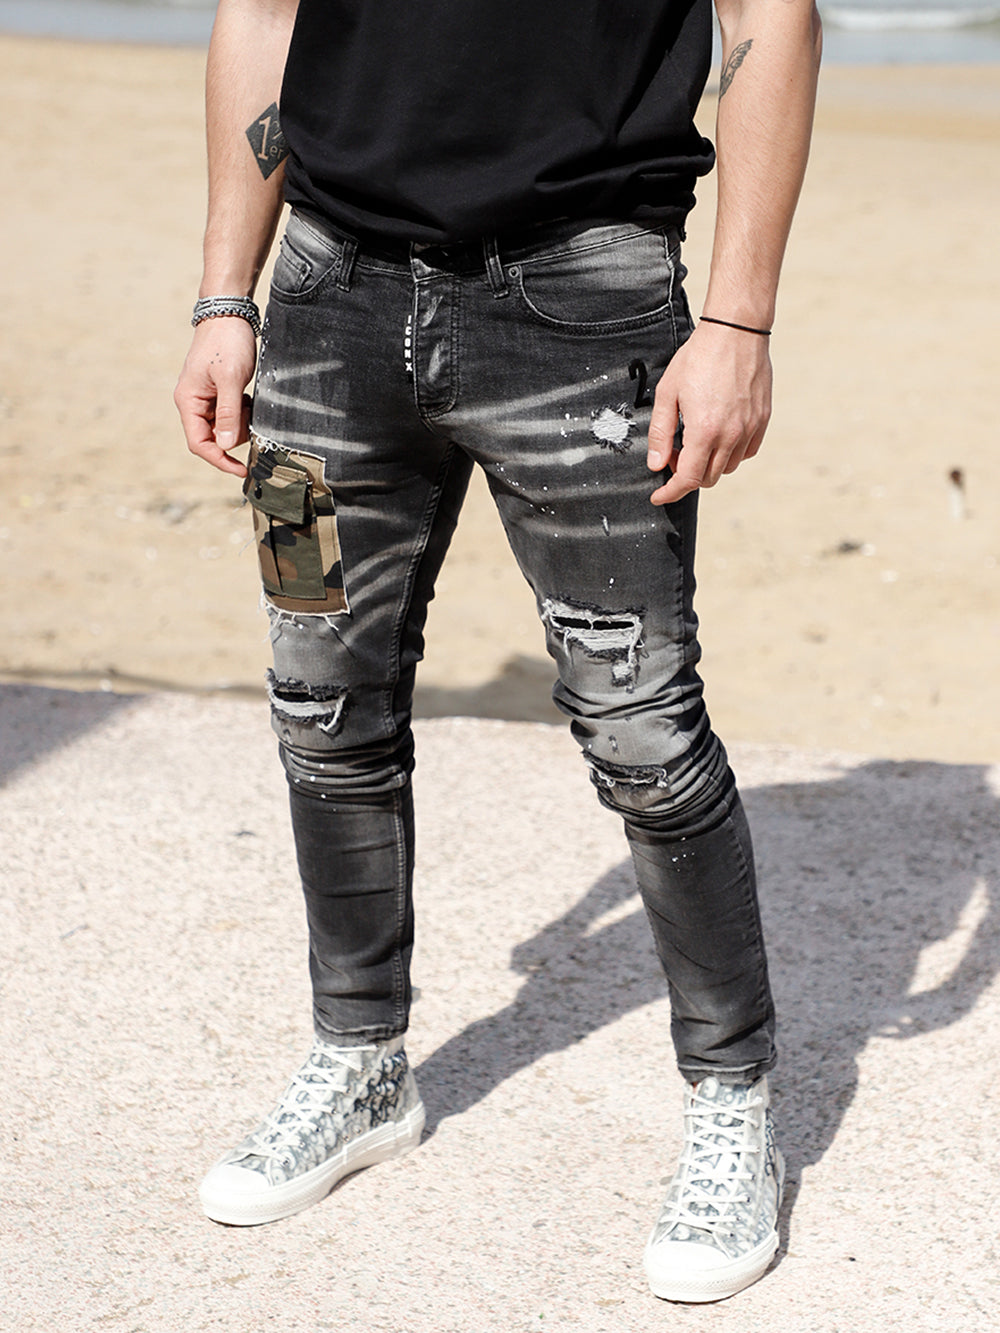 A man wearing a CAMOUFLAGE | BLACK t-shirt and jeans standing on the beach.